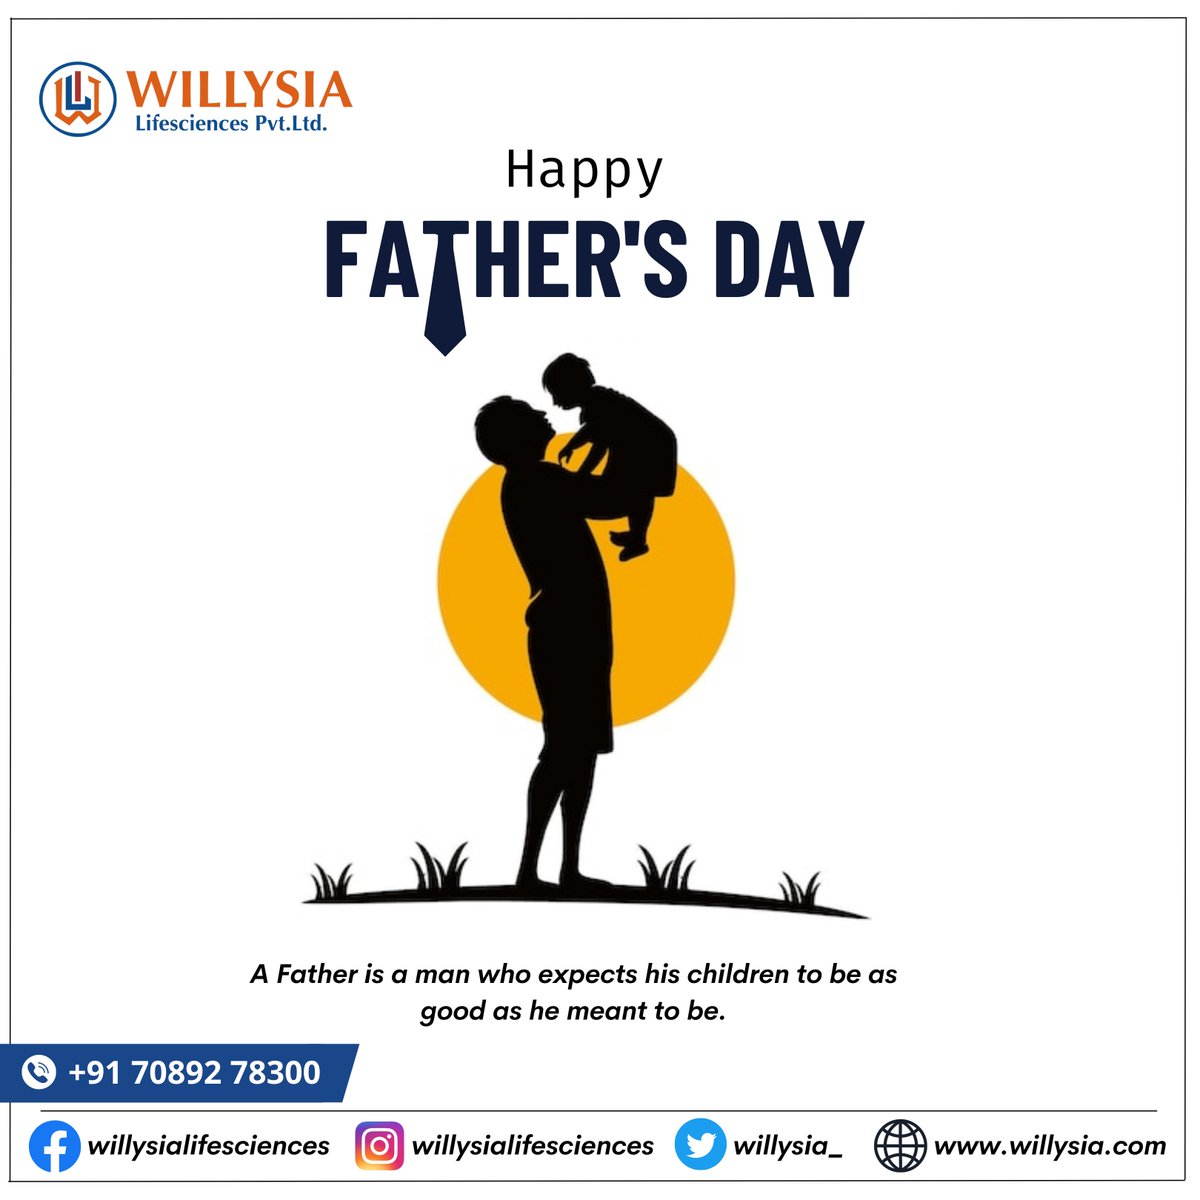 Dad a sone's first Hero & a Daughter's first love. 
Happy Father's Day

#pharma #fathersday #fathers #fatherson  #wishes #pharmacy #pharmaceutical #pharmacylife #medicine #medical #medicines #gwalior #willysia #followus #contactus